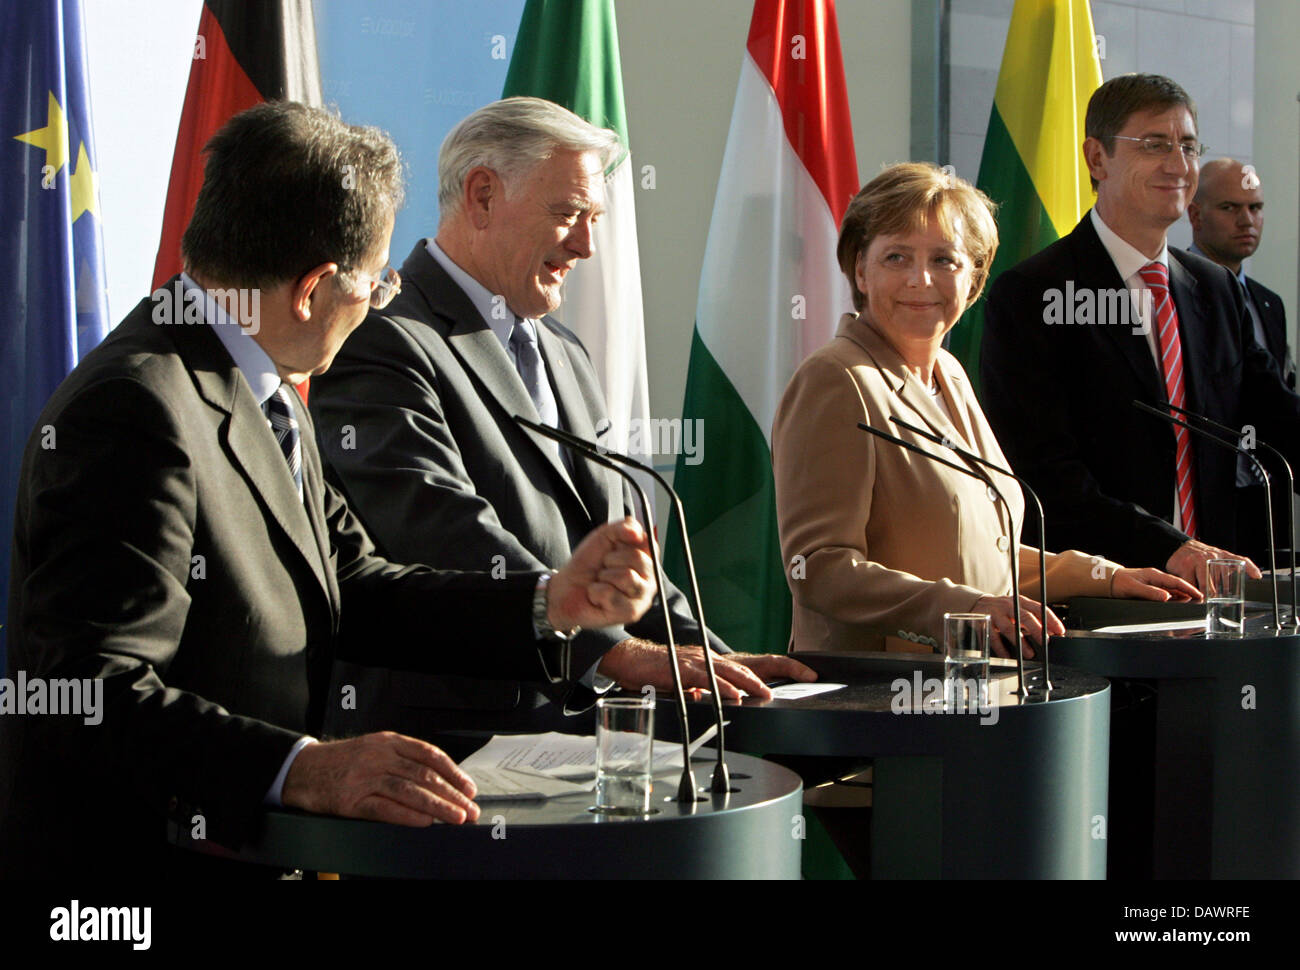 (L-R) Italian Prime Minister Romano Prodi, German Chancellor, Lithuanian President Valdas Adamkus, German Chancellor Angela Merkel and Hungarian Prime Minister Ferenc Gyurcsany pictured at a press conference in the Chancellery of Berlin, Germany, 11 June 2007. Until the EU Council Summit on 21 and 22 June Merkel will receive about all EU heads of states and governments in her role  Stock Photo